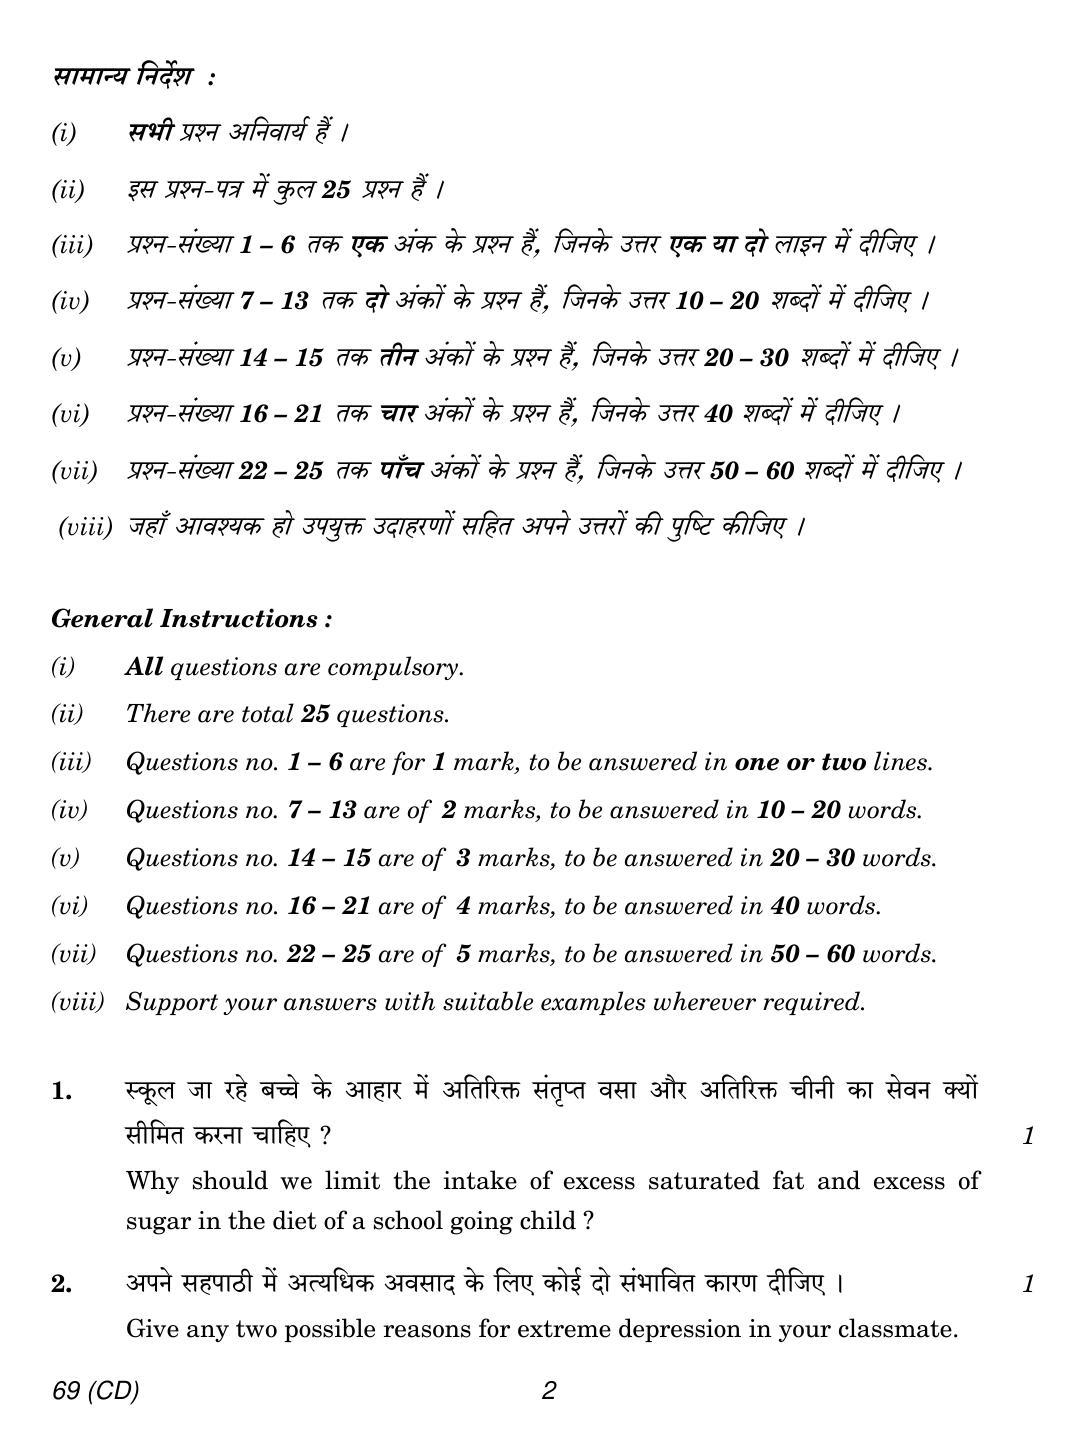 CBSE Class 12 69 HOME SCIENCE CD 2018 Question Paper - Page 2